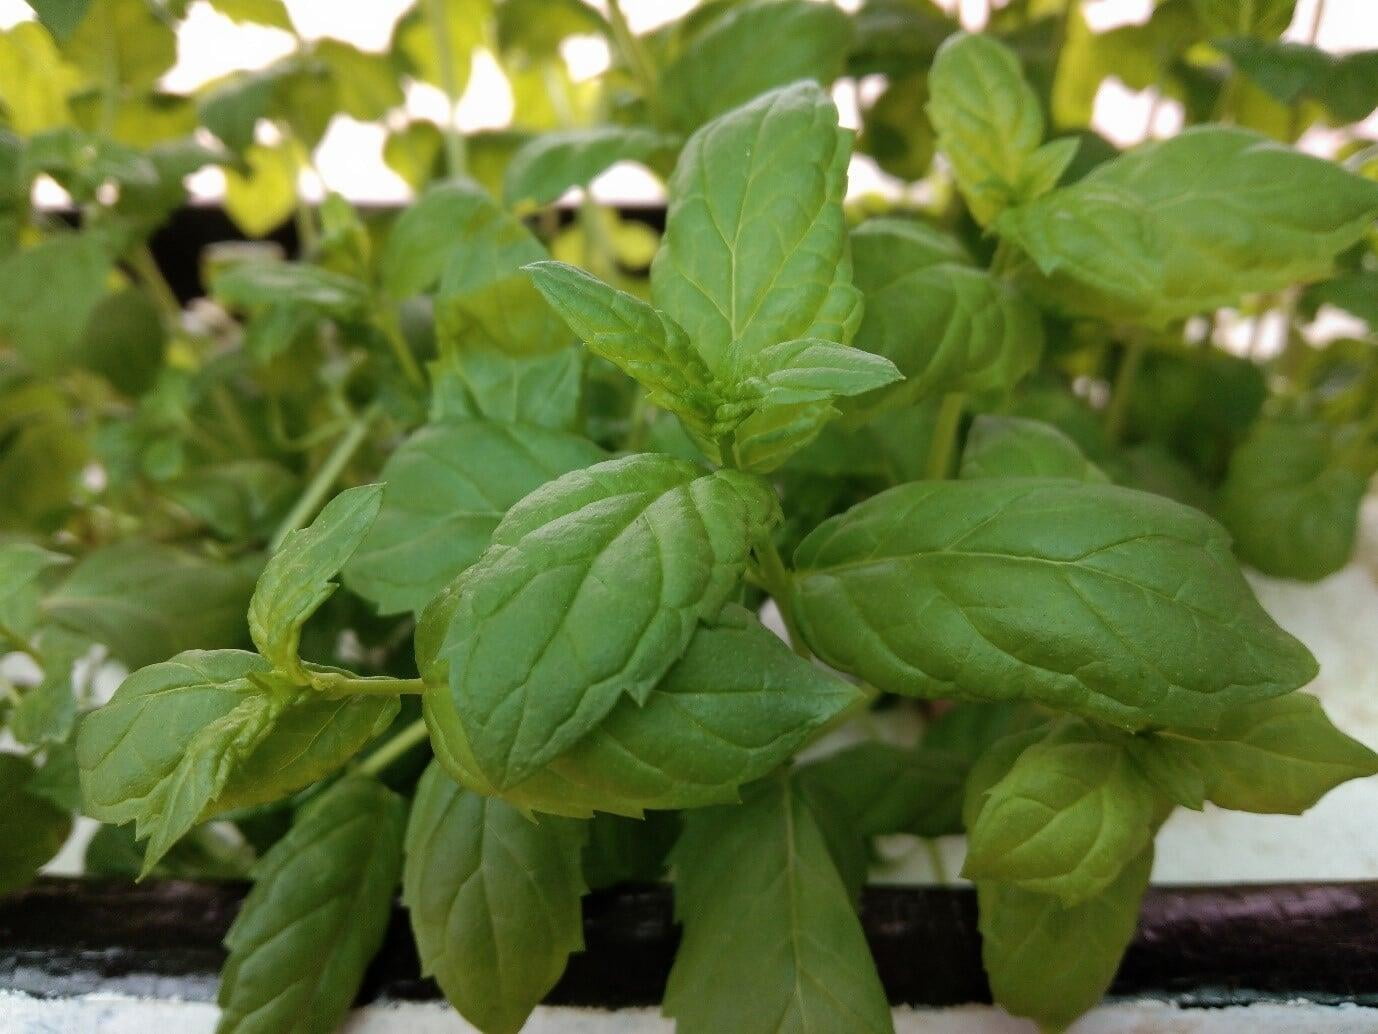 How to grow Mint in your Home Garden